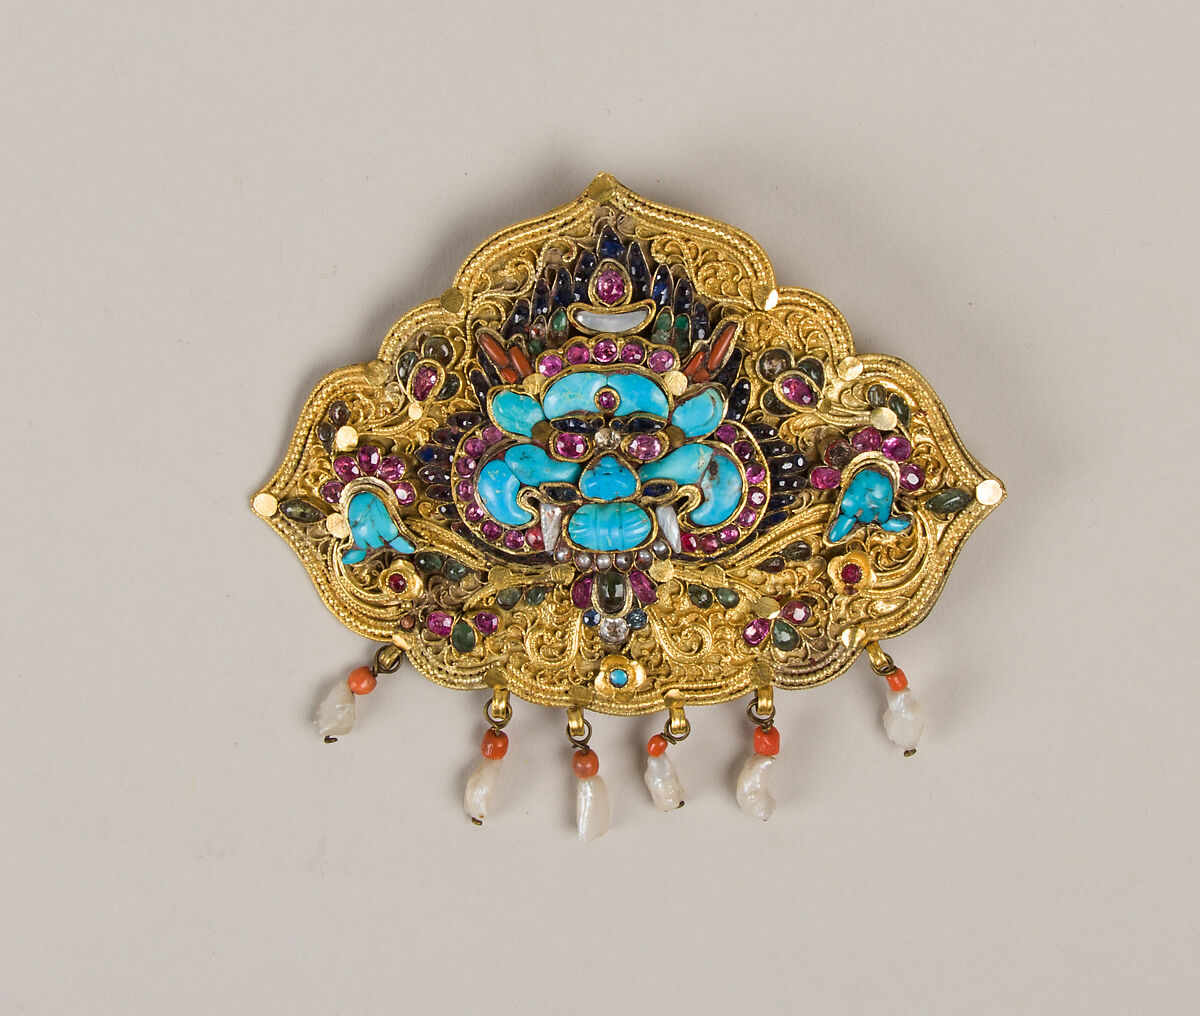 Woman’s Brooch with Monster Mask, Gilt silver, rubies, sapphires, emeralds, coral, pearls, mother-of-pearl, and turquoise, Nepal 